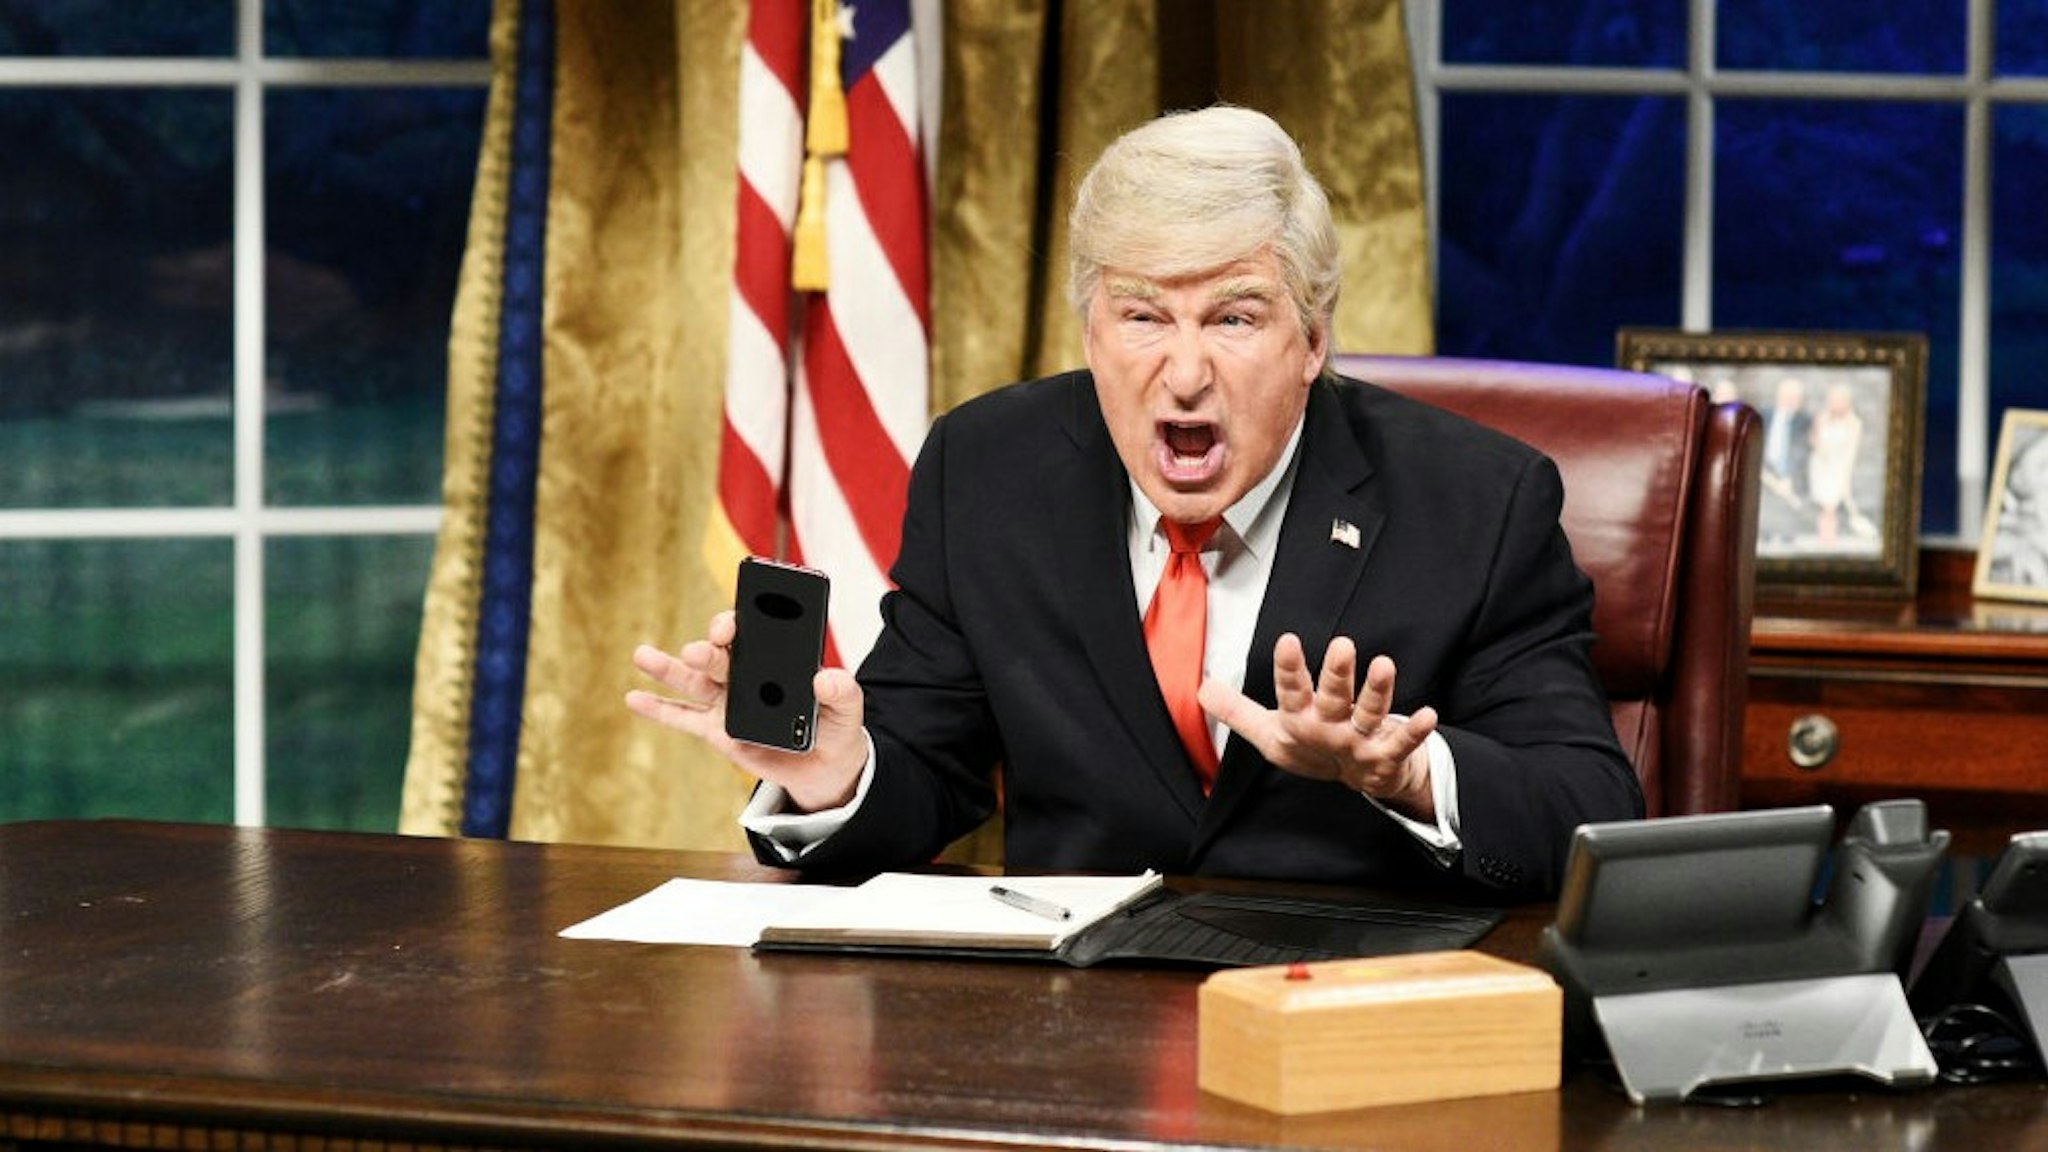 SATURDAY NIGHT LIVE -- "Sandra Oh" Episode 1762 -- Pictured: Alec Baldwin as Donald Trump during the "Mueller Report" Cold Open on Saturday, March 30, 2019 -- (Photo by: